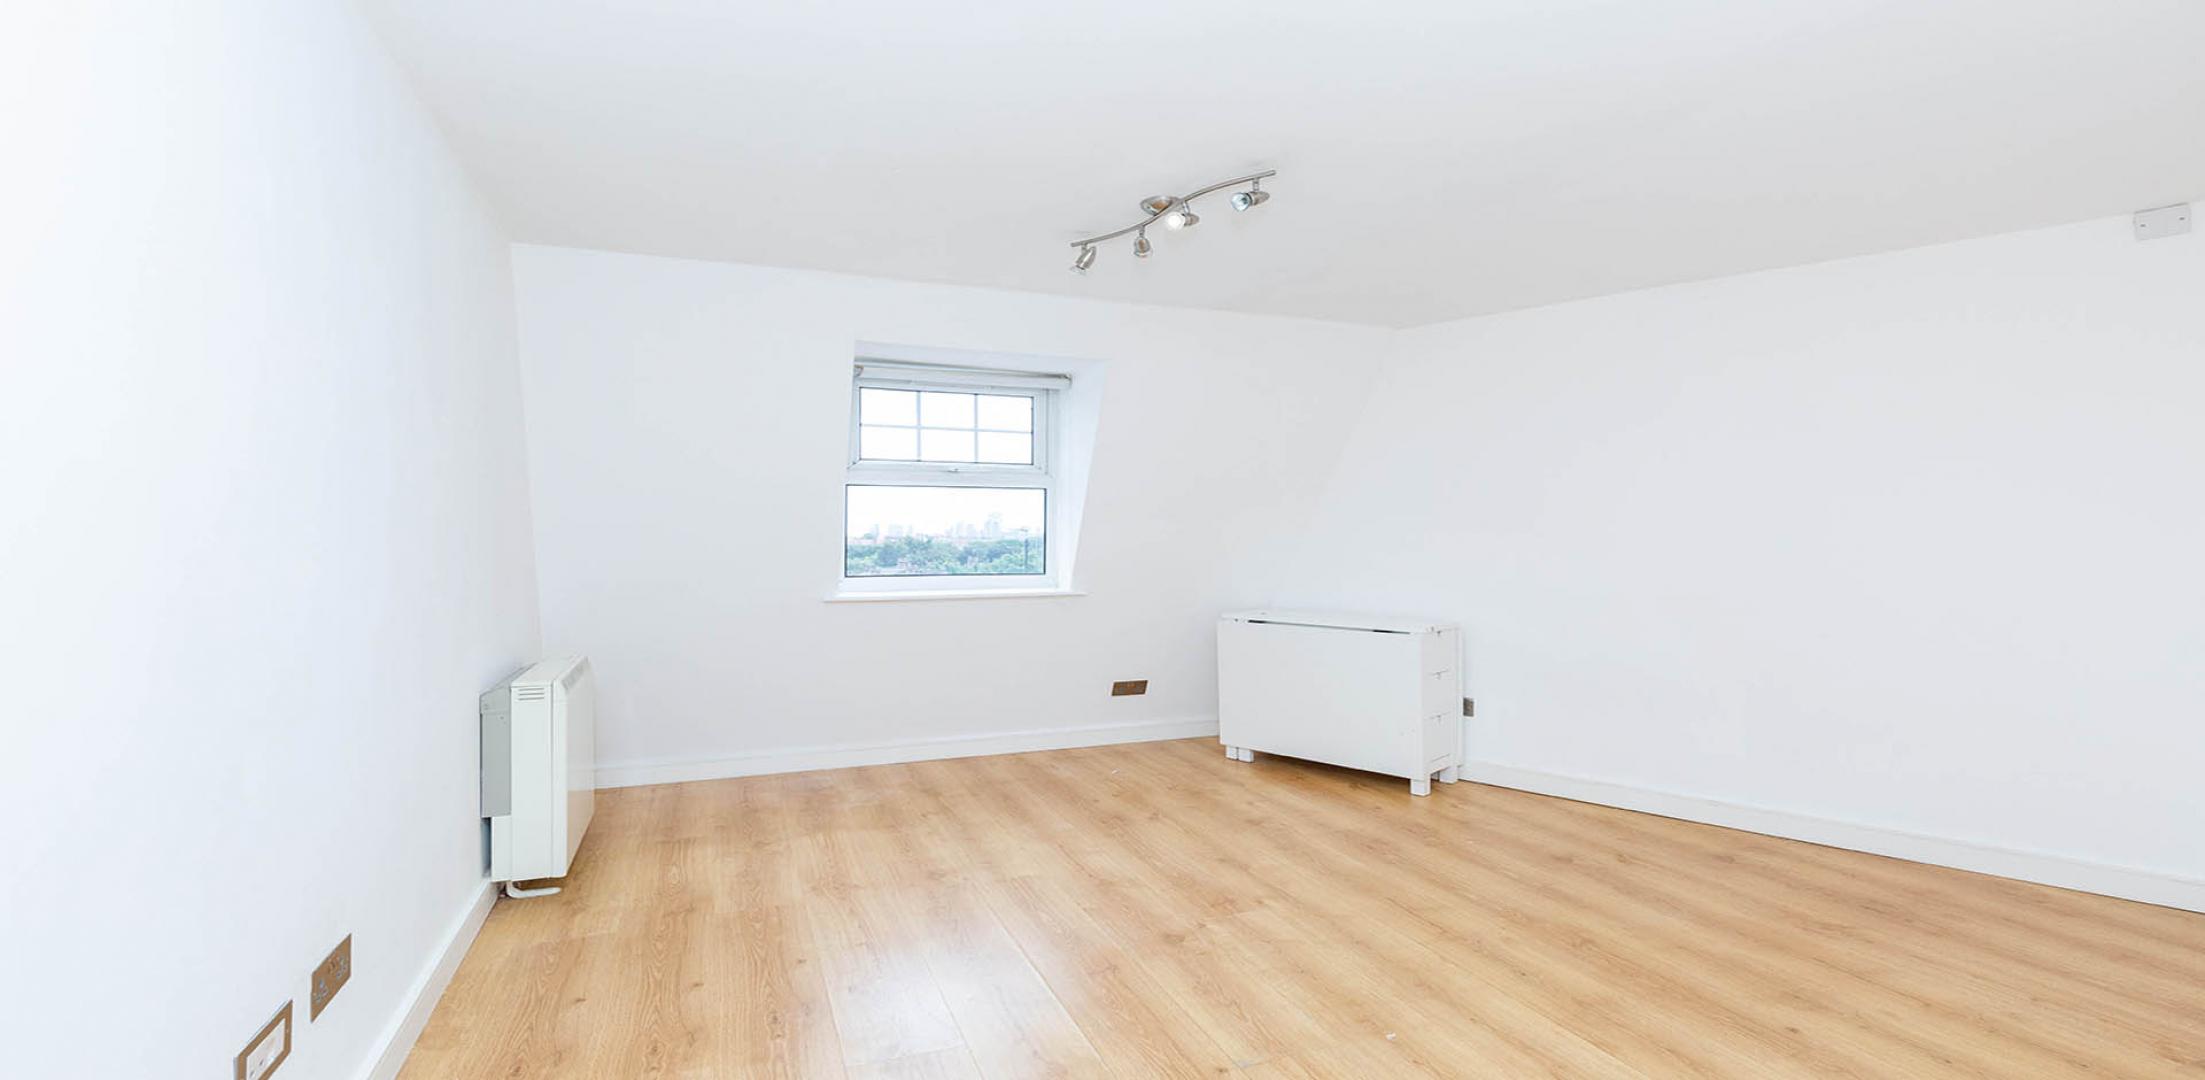 			PERFECT FOR 4 SHARERS!, 3 Bedroom, 1 bath, 1 reception Flat			 Criterion Mews, ARCHWAY